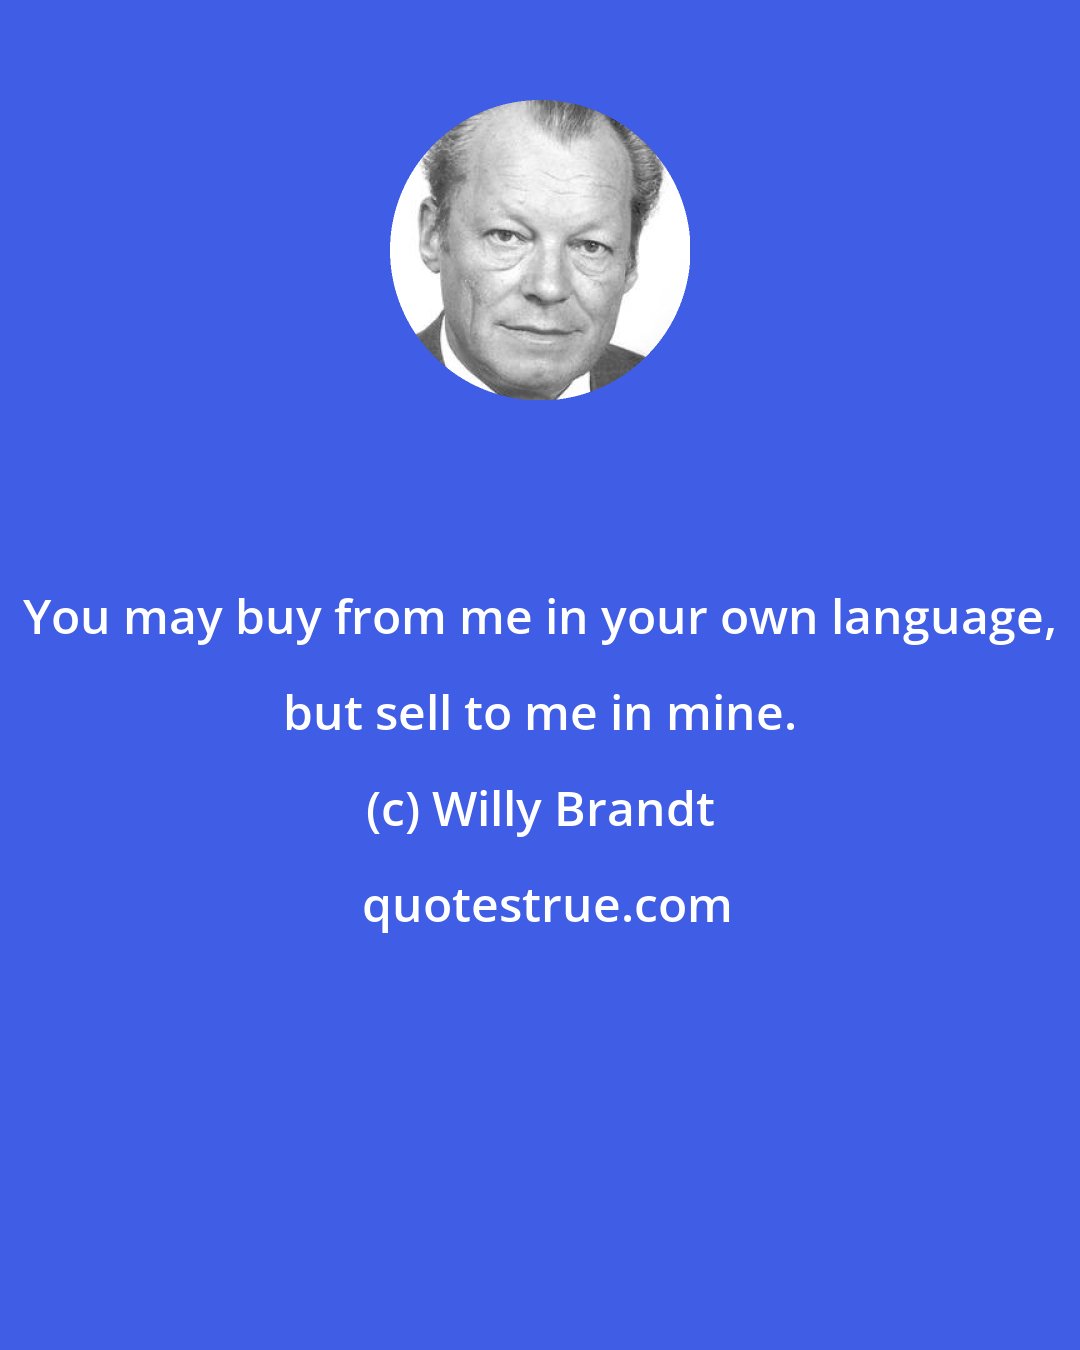 Willy Brandt: You may buy from me in your own language, but sell to me in mine.